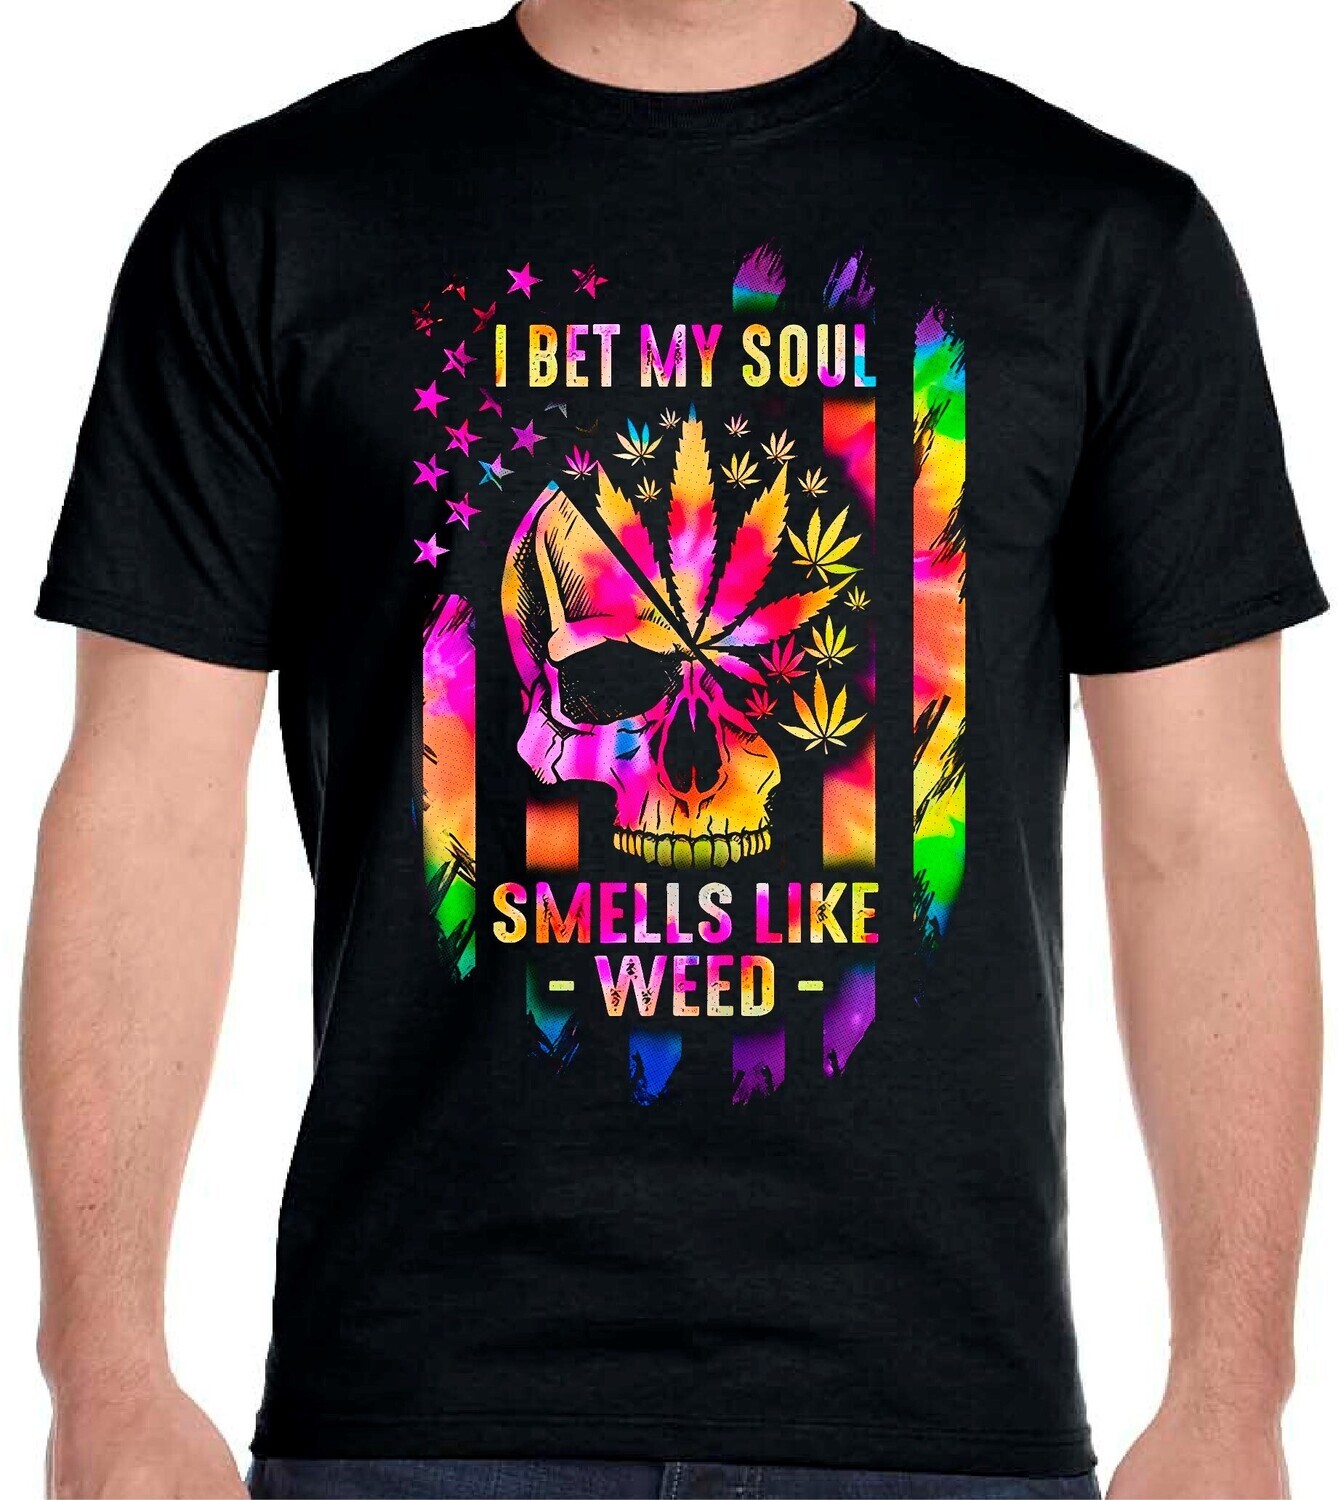 MY SOUL SMELLS LIKE WEED